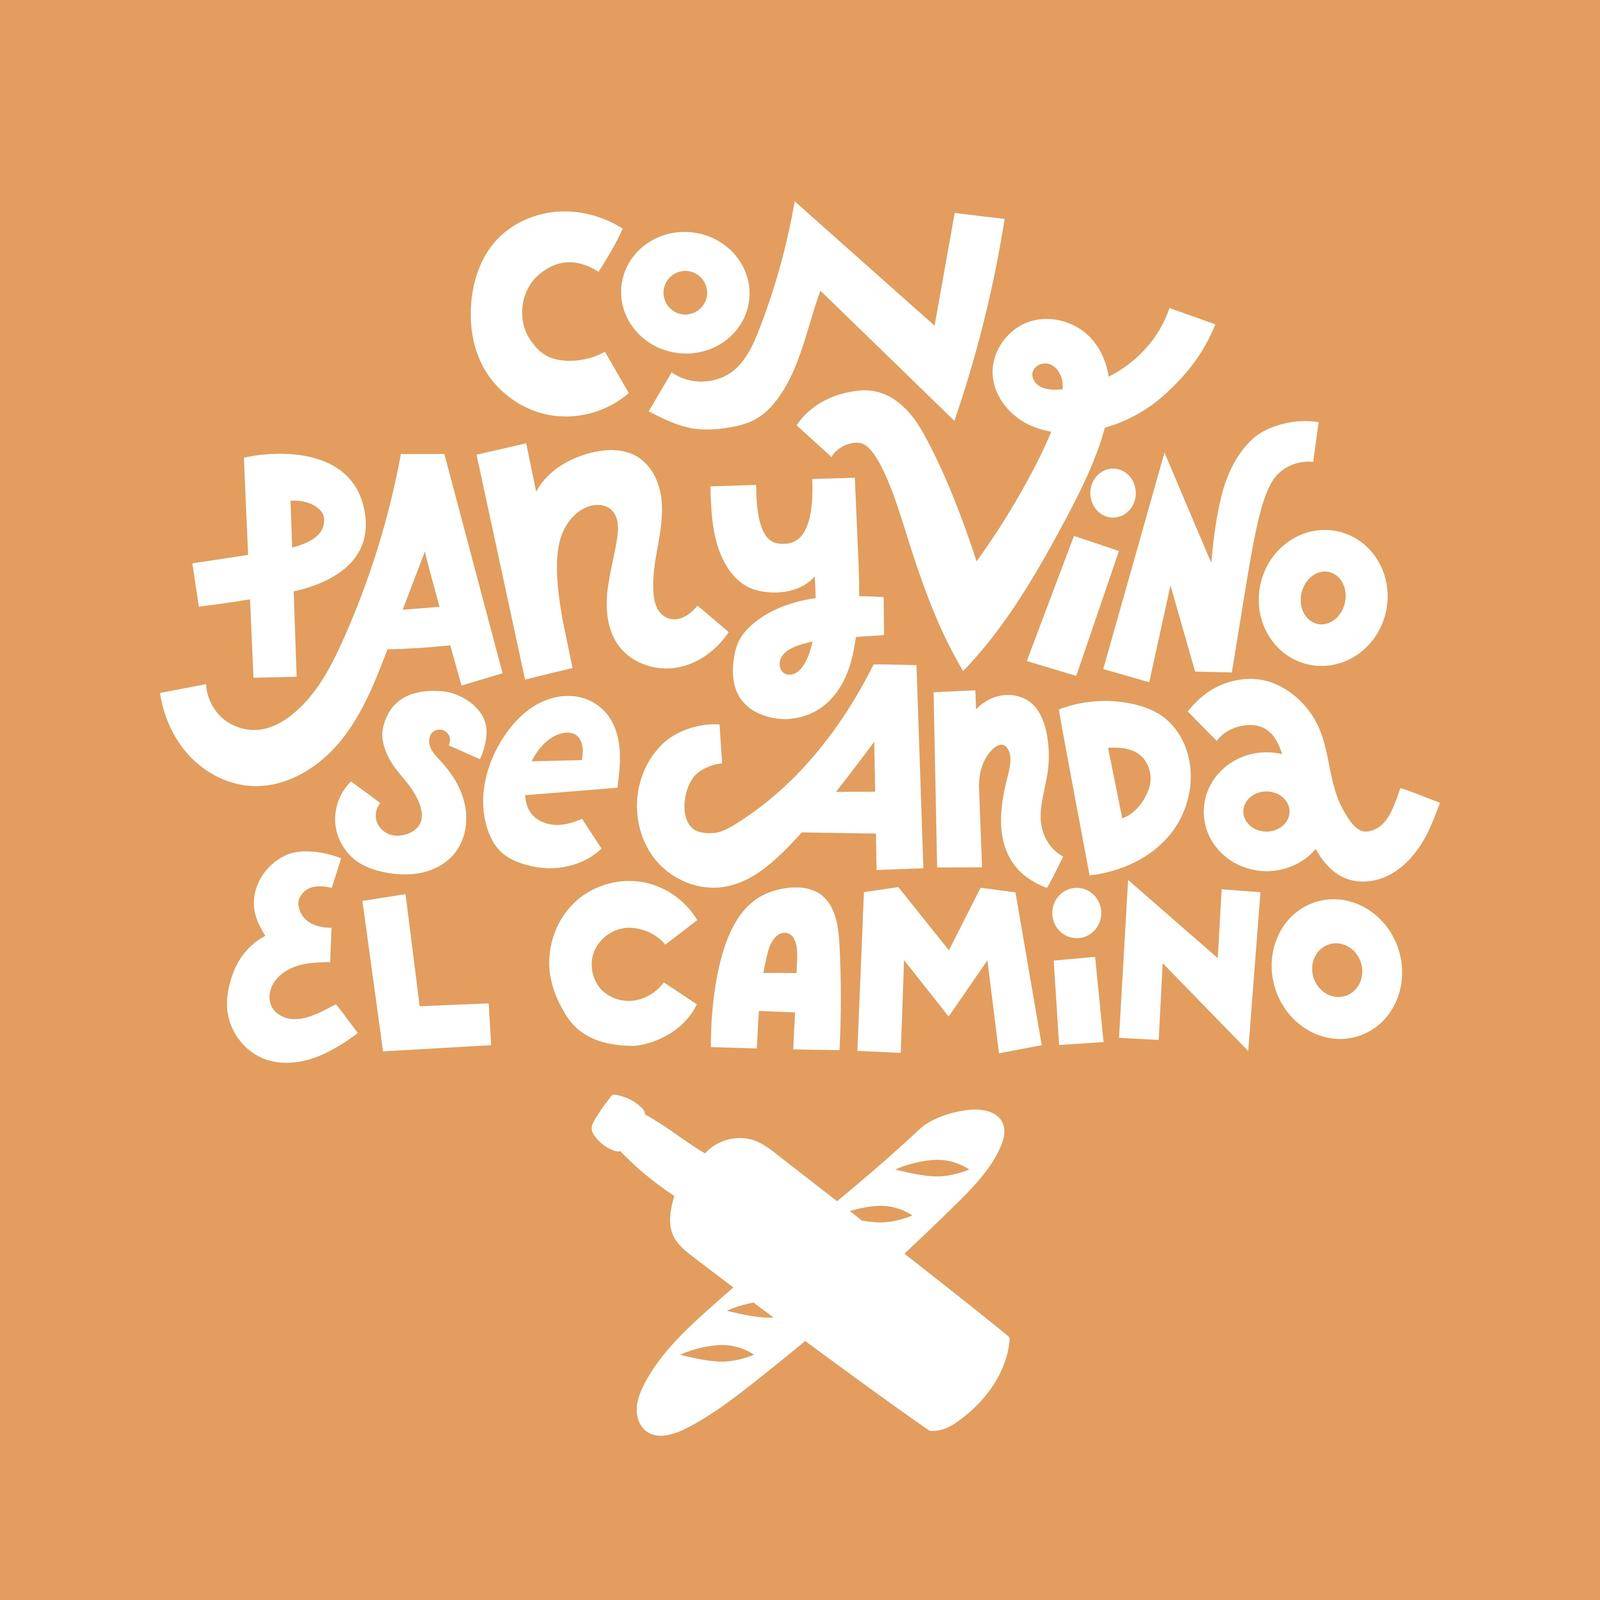 With bread and wine the road is easy. Spanish saying about bread. Hand drawn lettering print for T-shirts, tote bags, mugs etc. Single color vector for cutting.